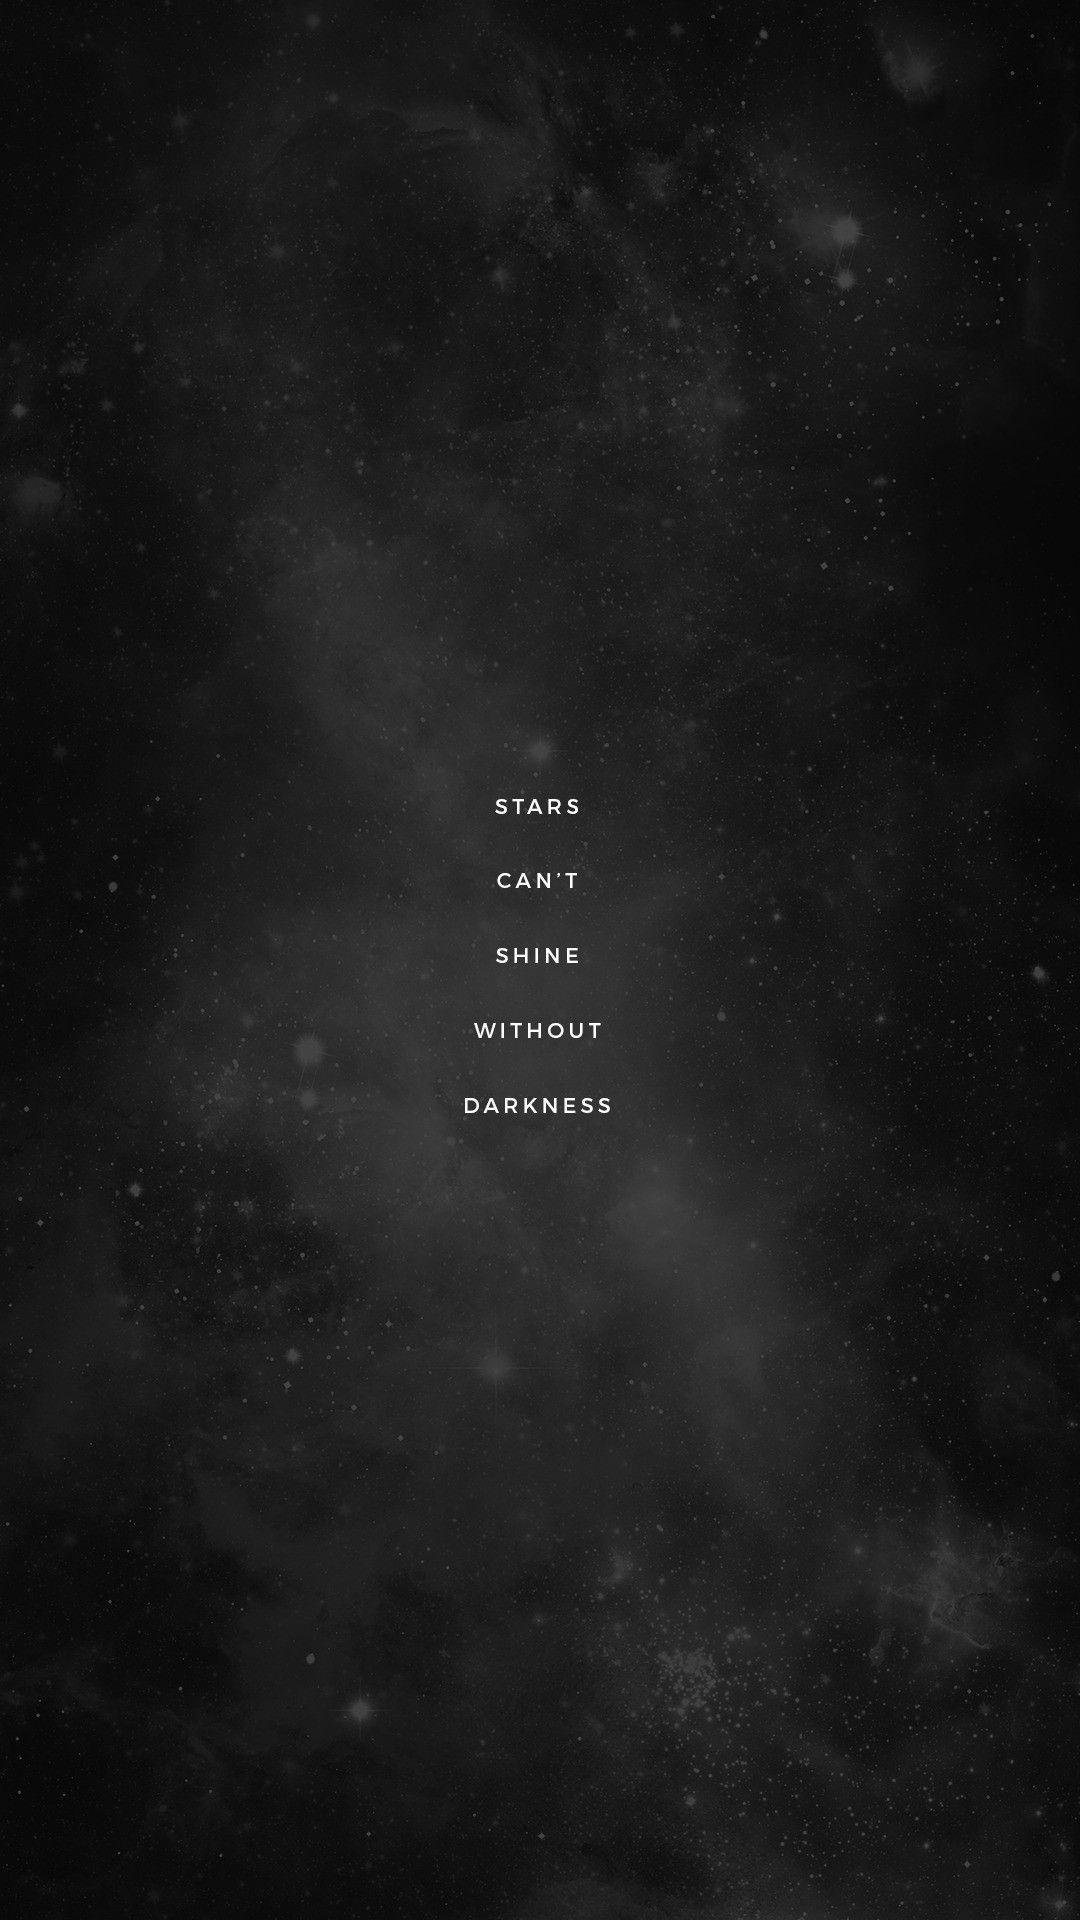 Dark #Space iPhone wallpaper. Space quotes, Wallpaper iphone quotes, Wallpaper quotes